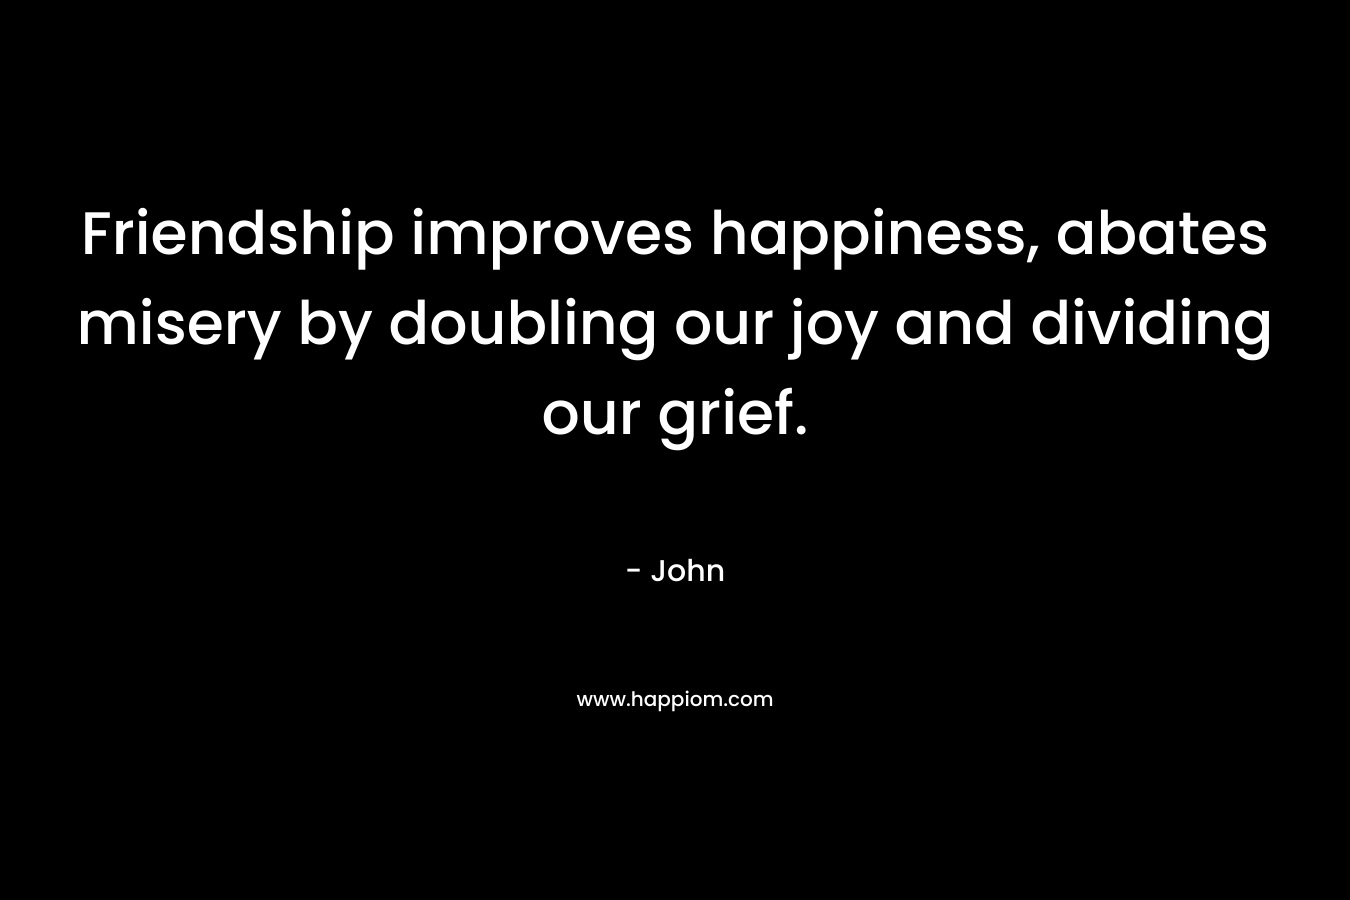 Friendship improves happiness, abates misery by doubling our joy and dividing our grief. – John